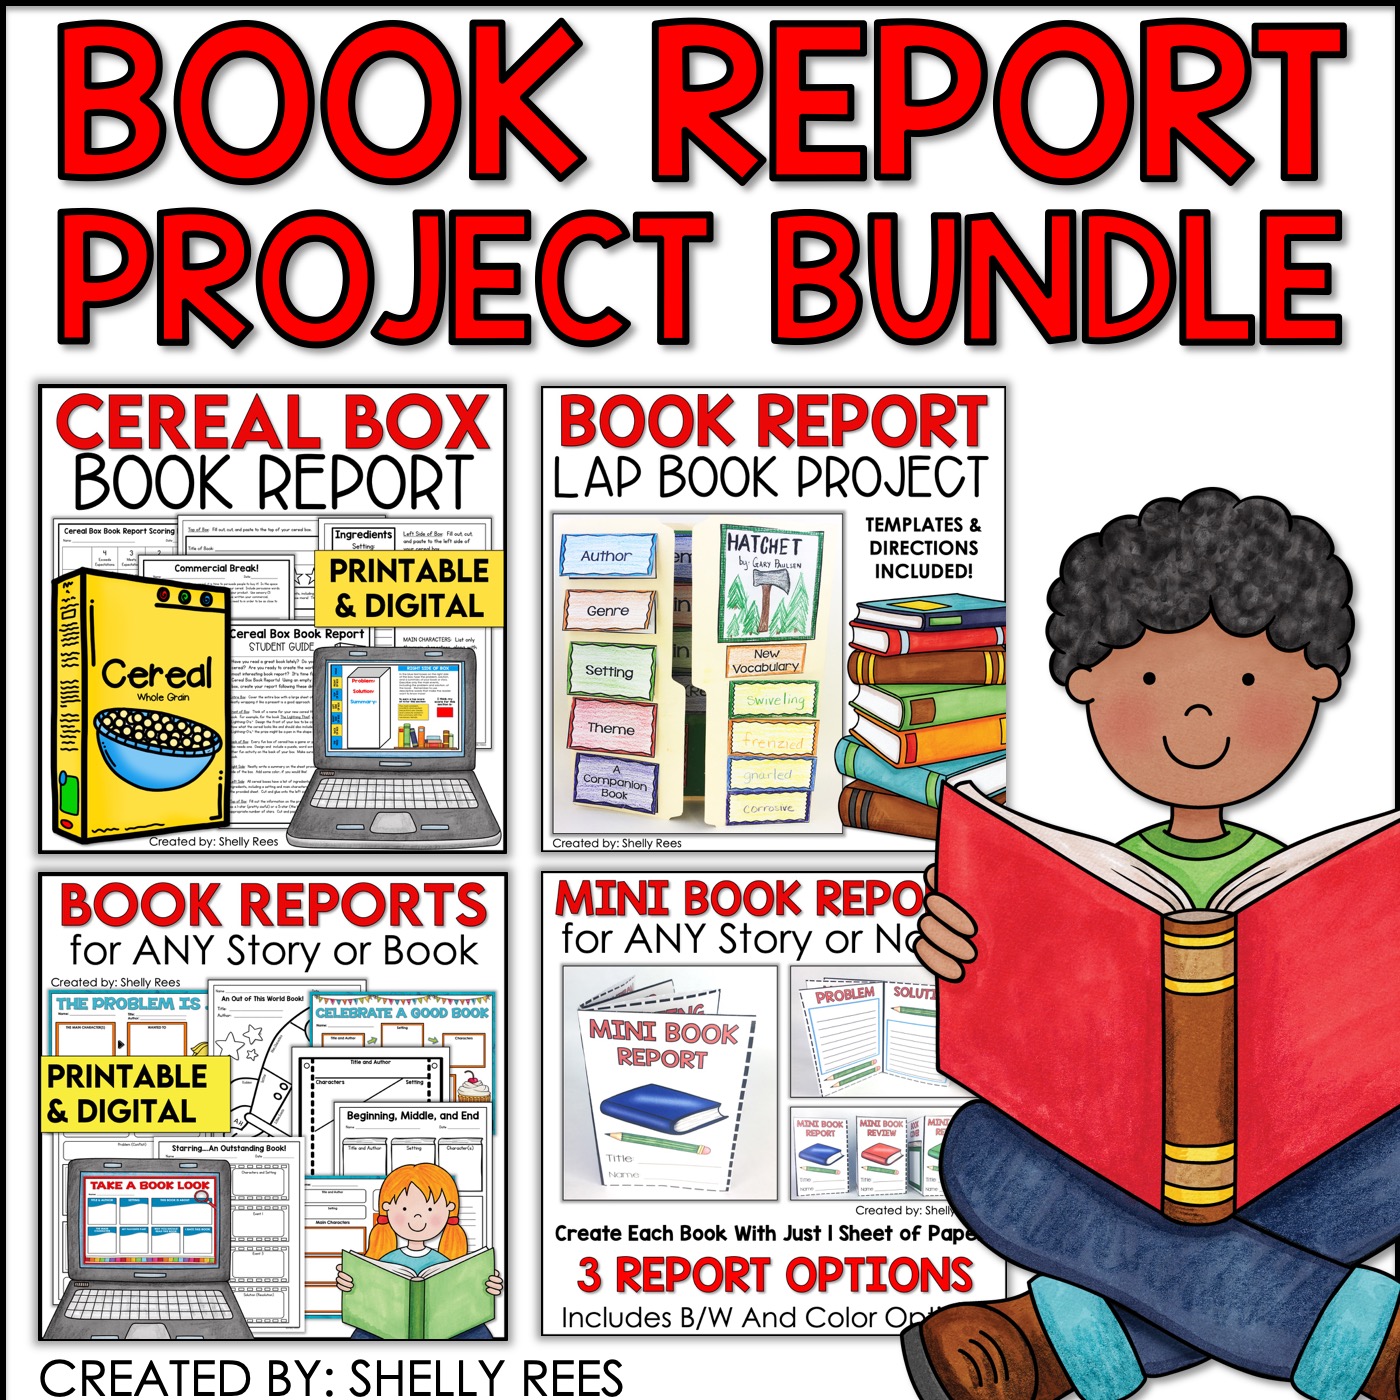 what is a book report project